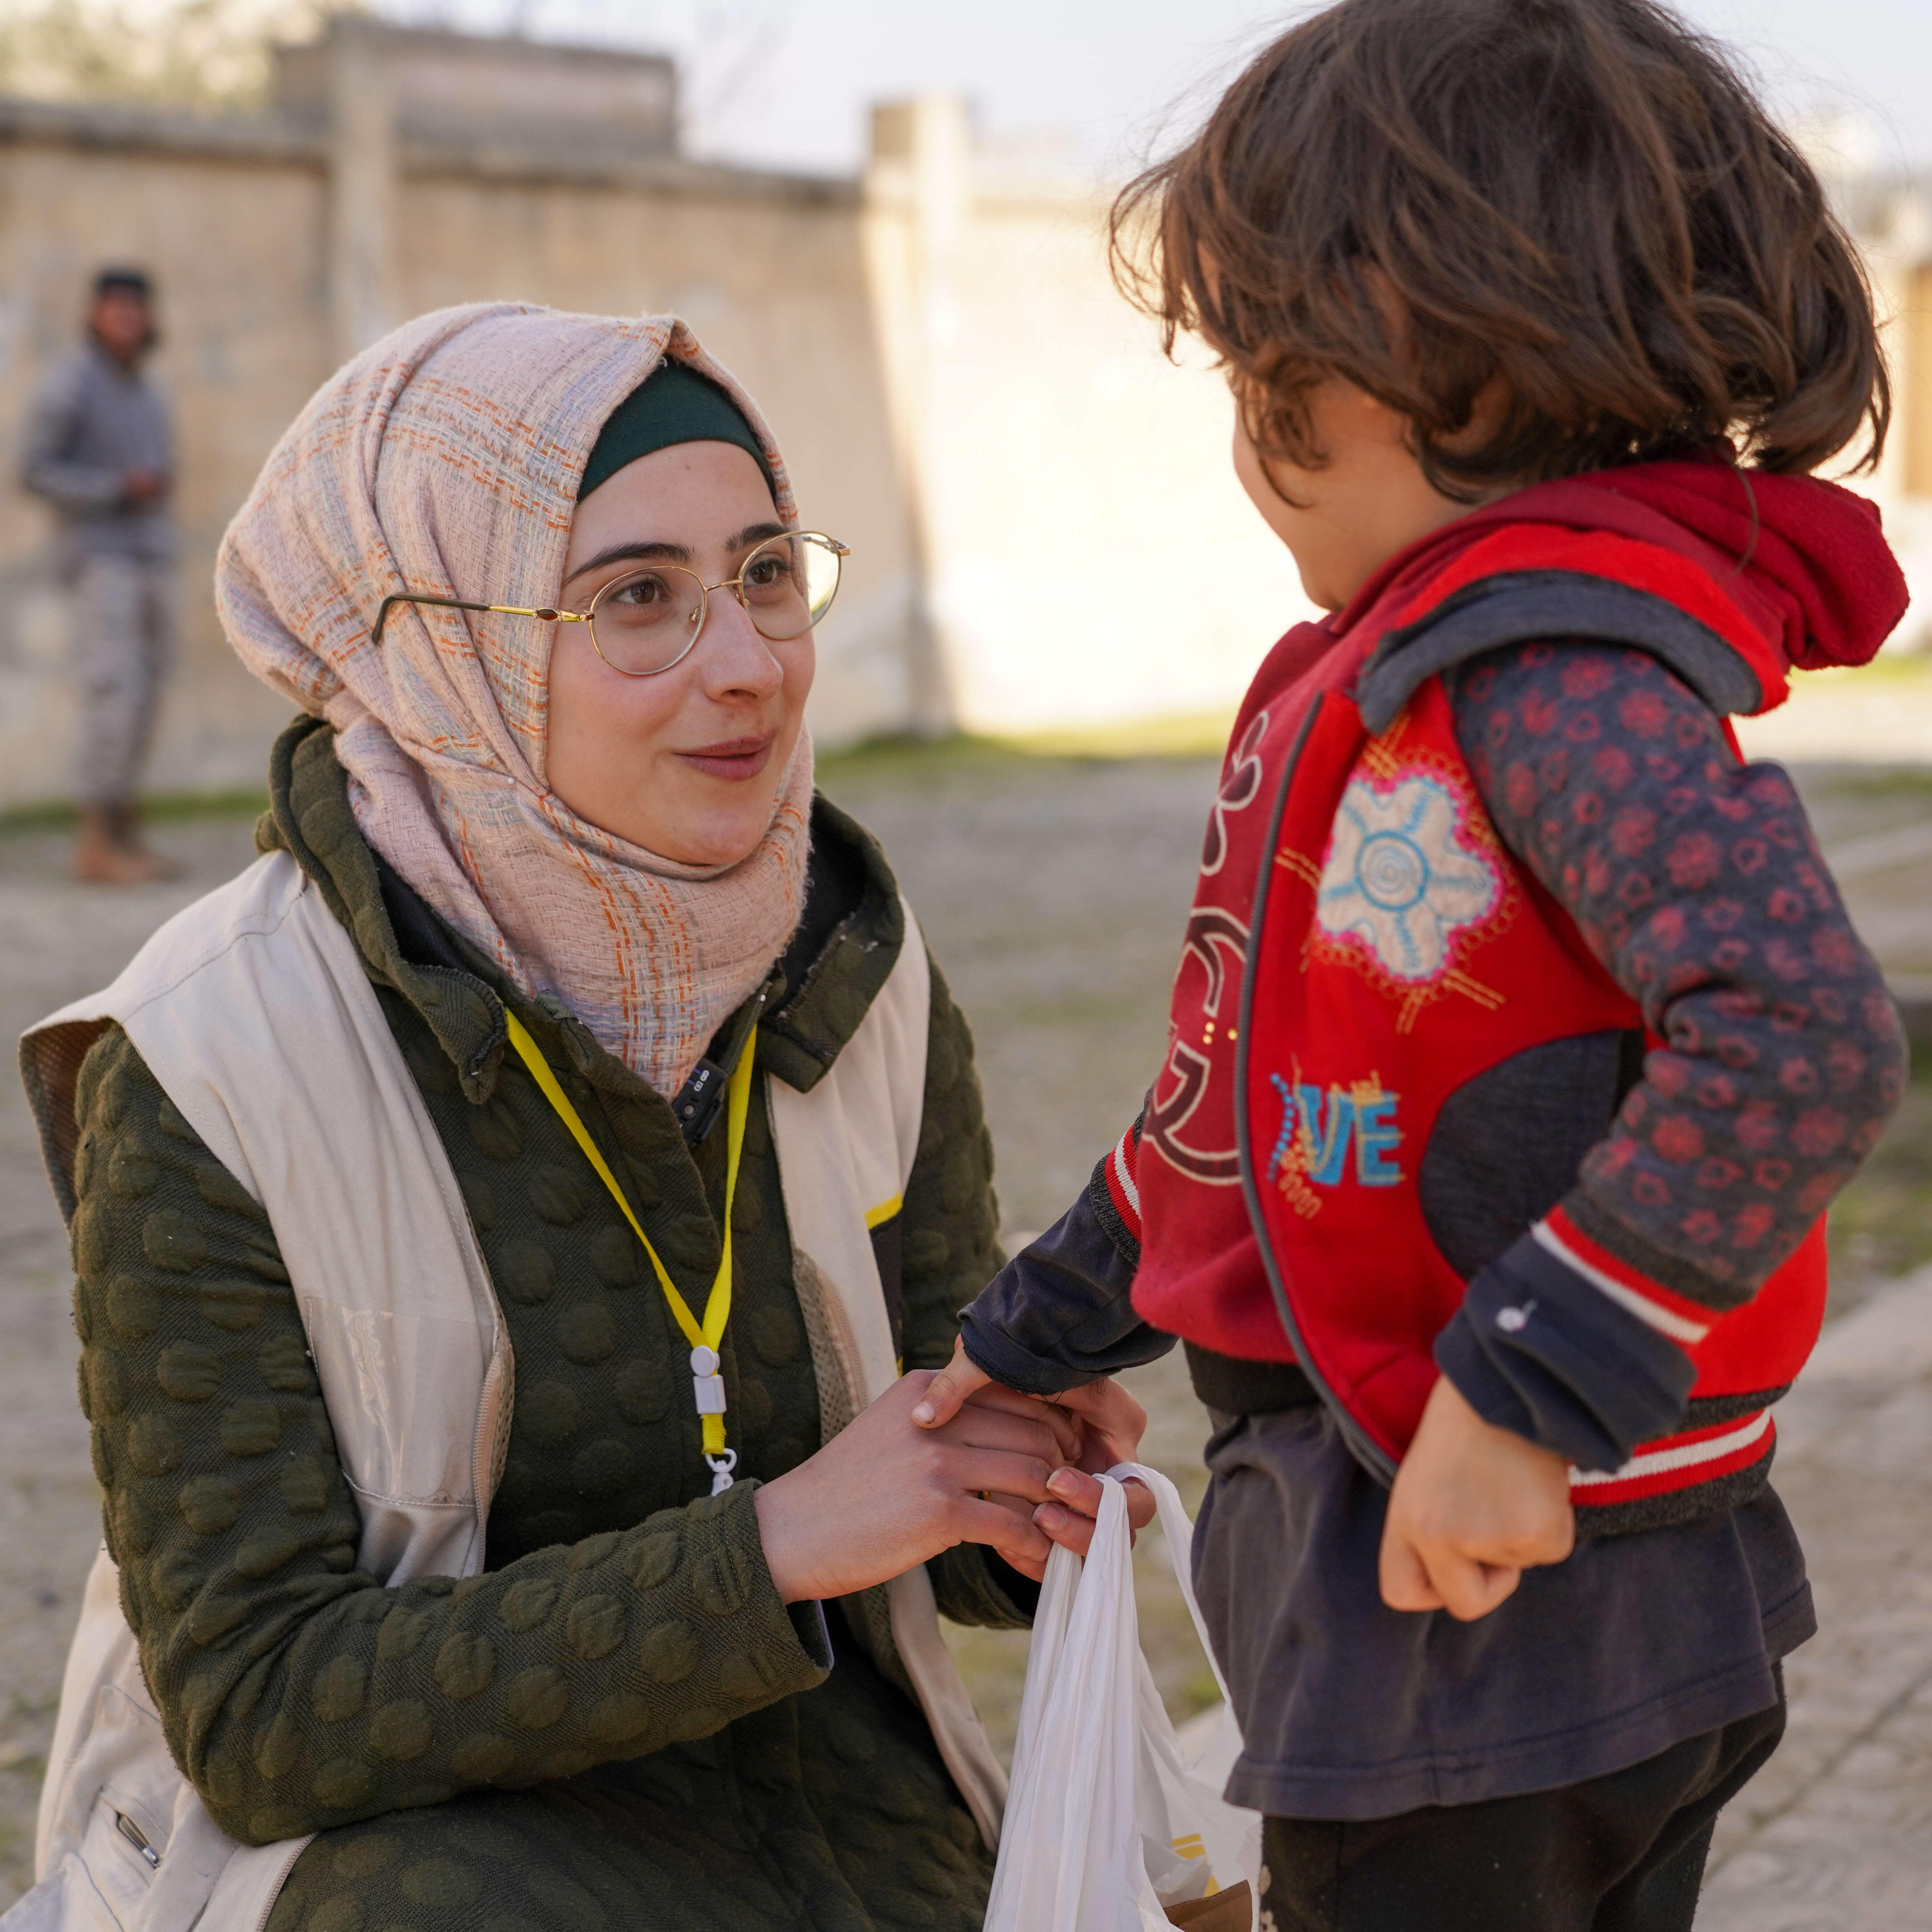 IRC staff member speaks with child. The International Rescue Committee is working rapidly to assist people impacted by the 6 February 2023 earthquake.